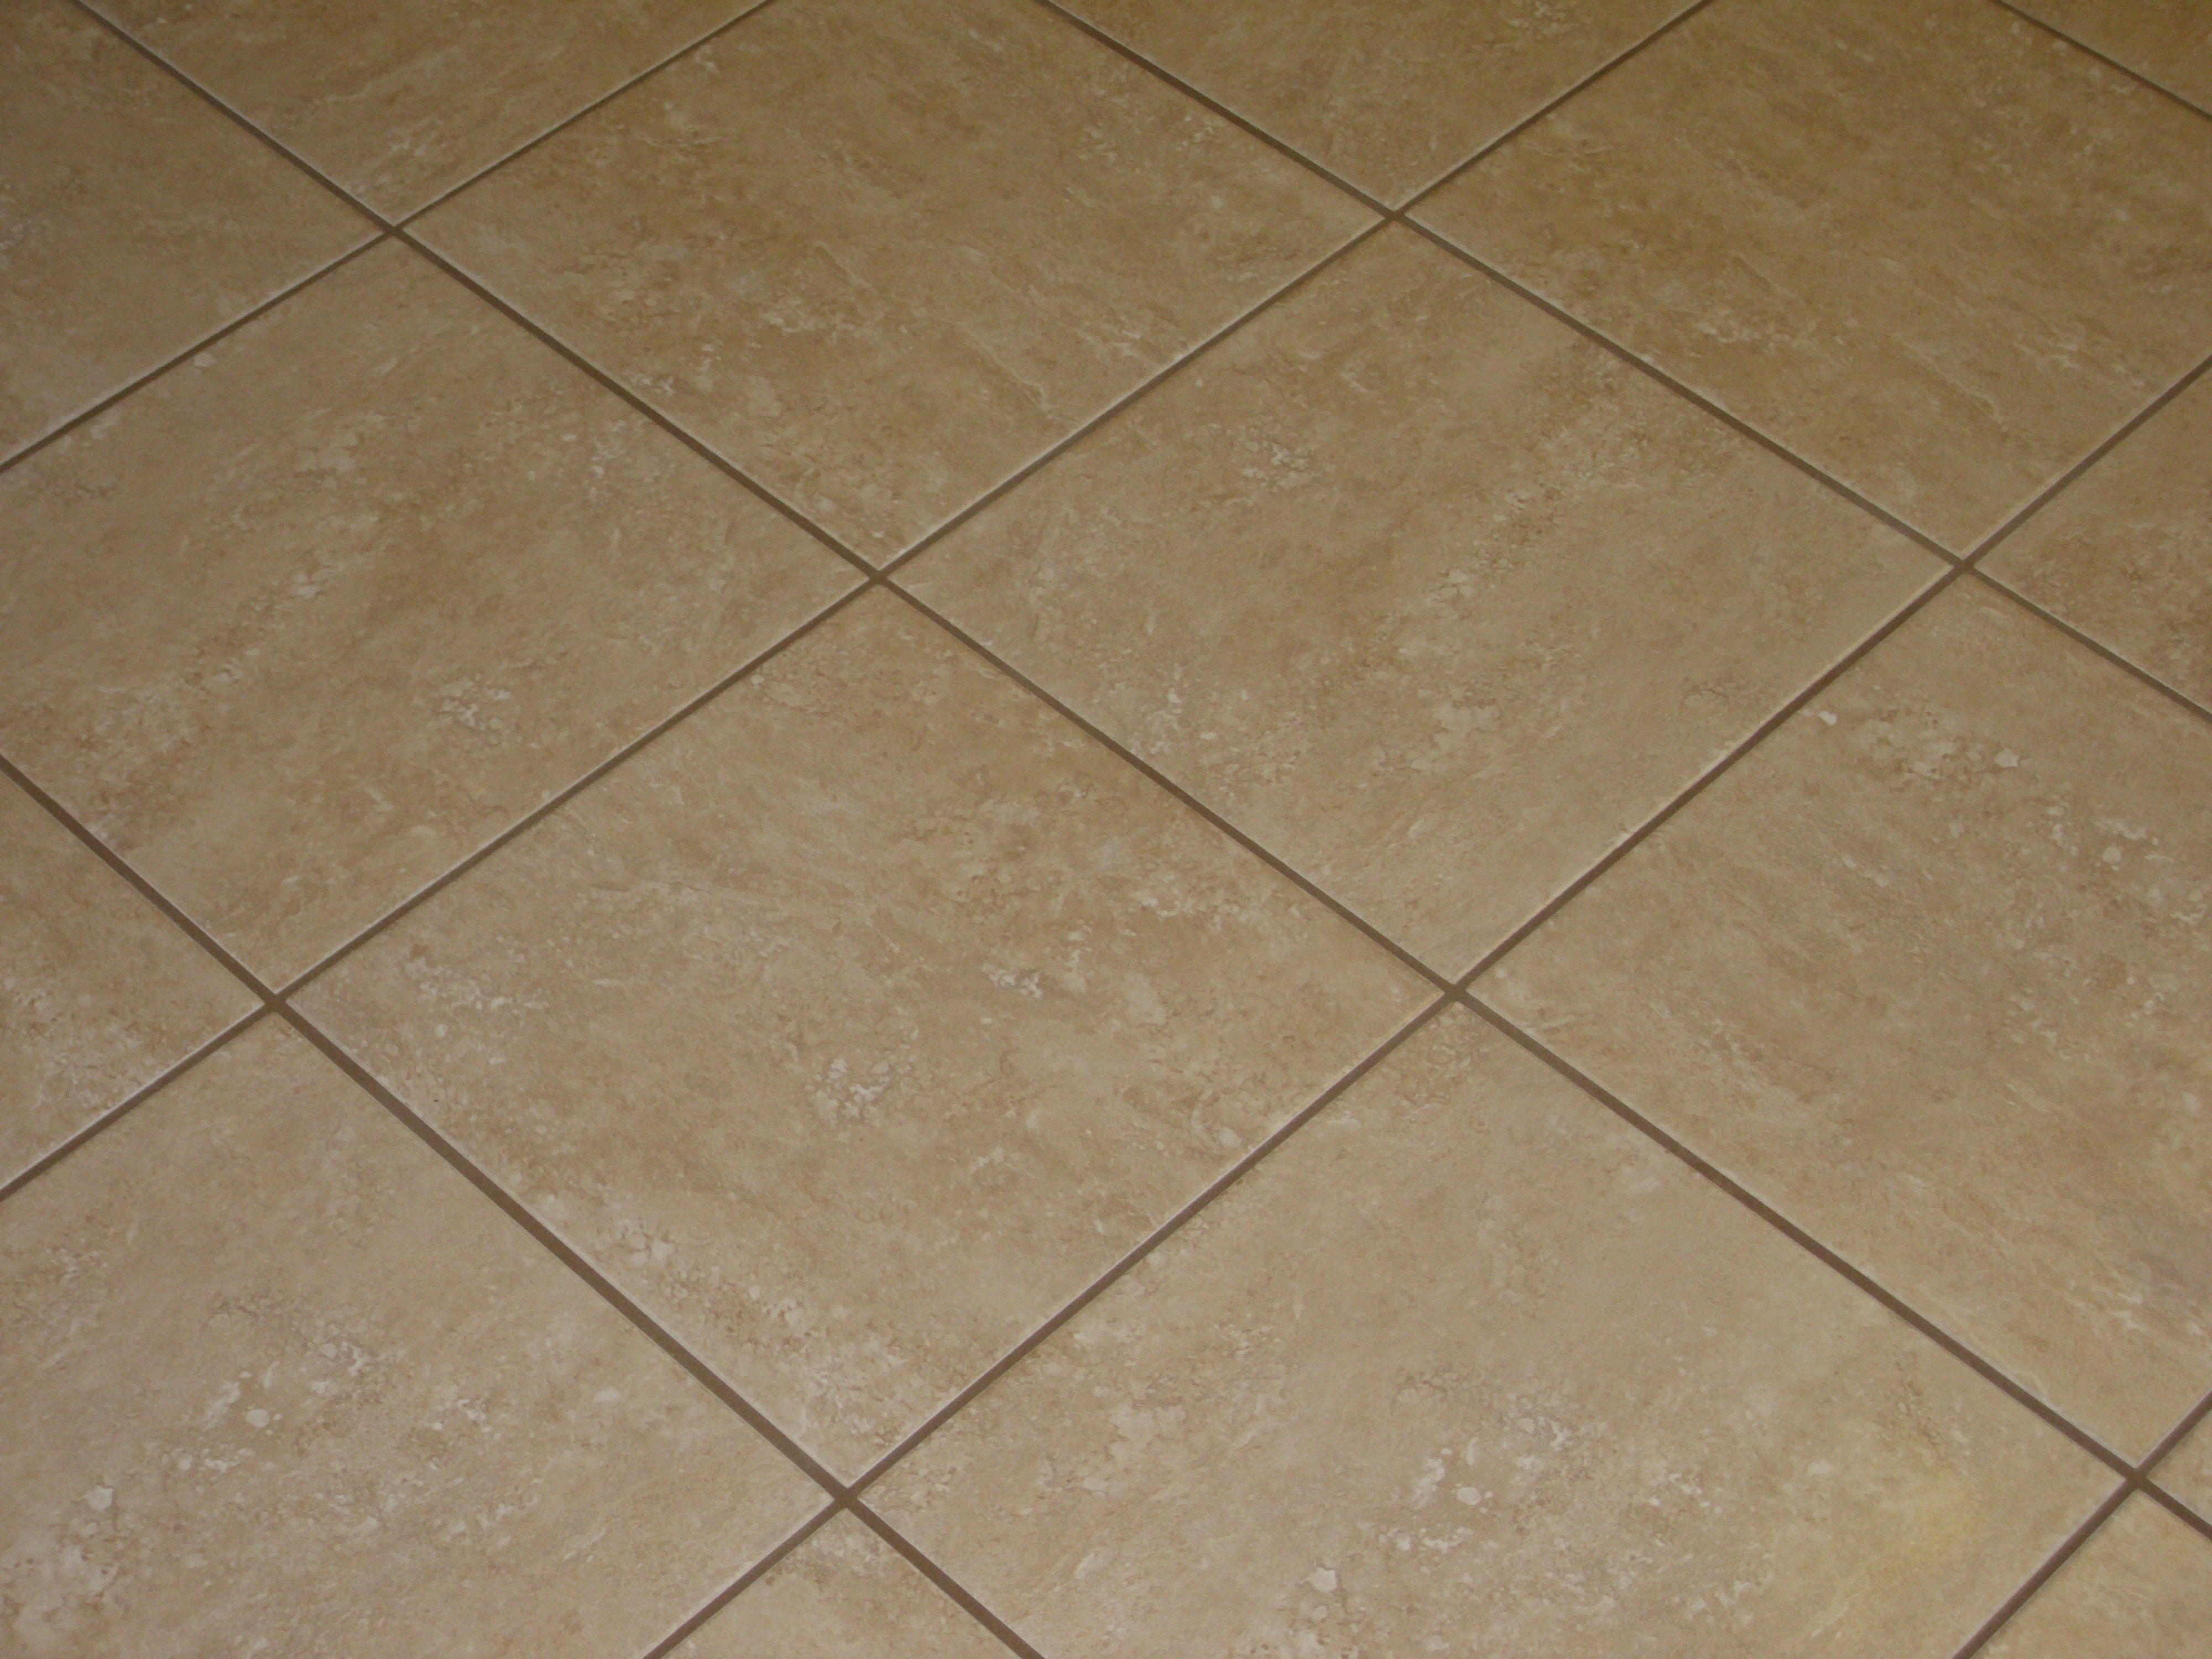 Tile Grout To Seal Or Not To Seal Cjs Carpet Tile Cleaning